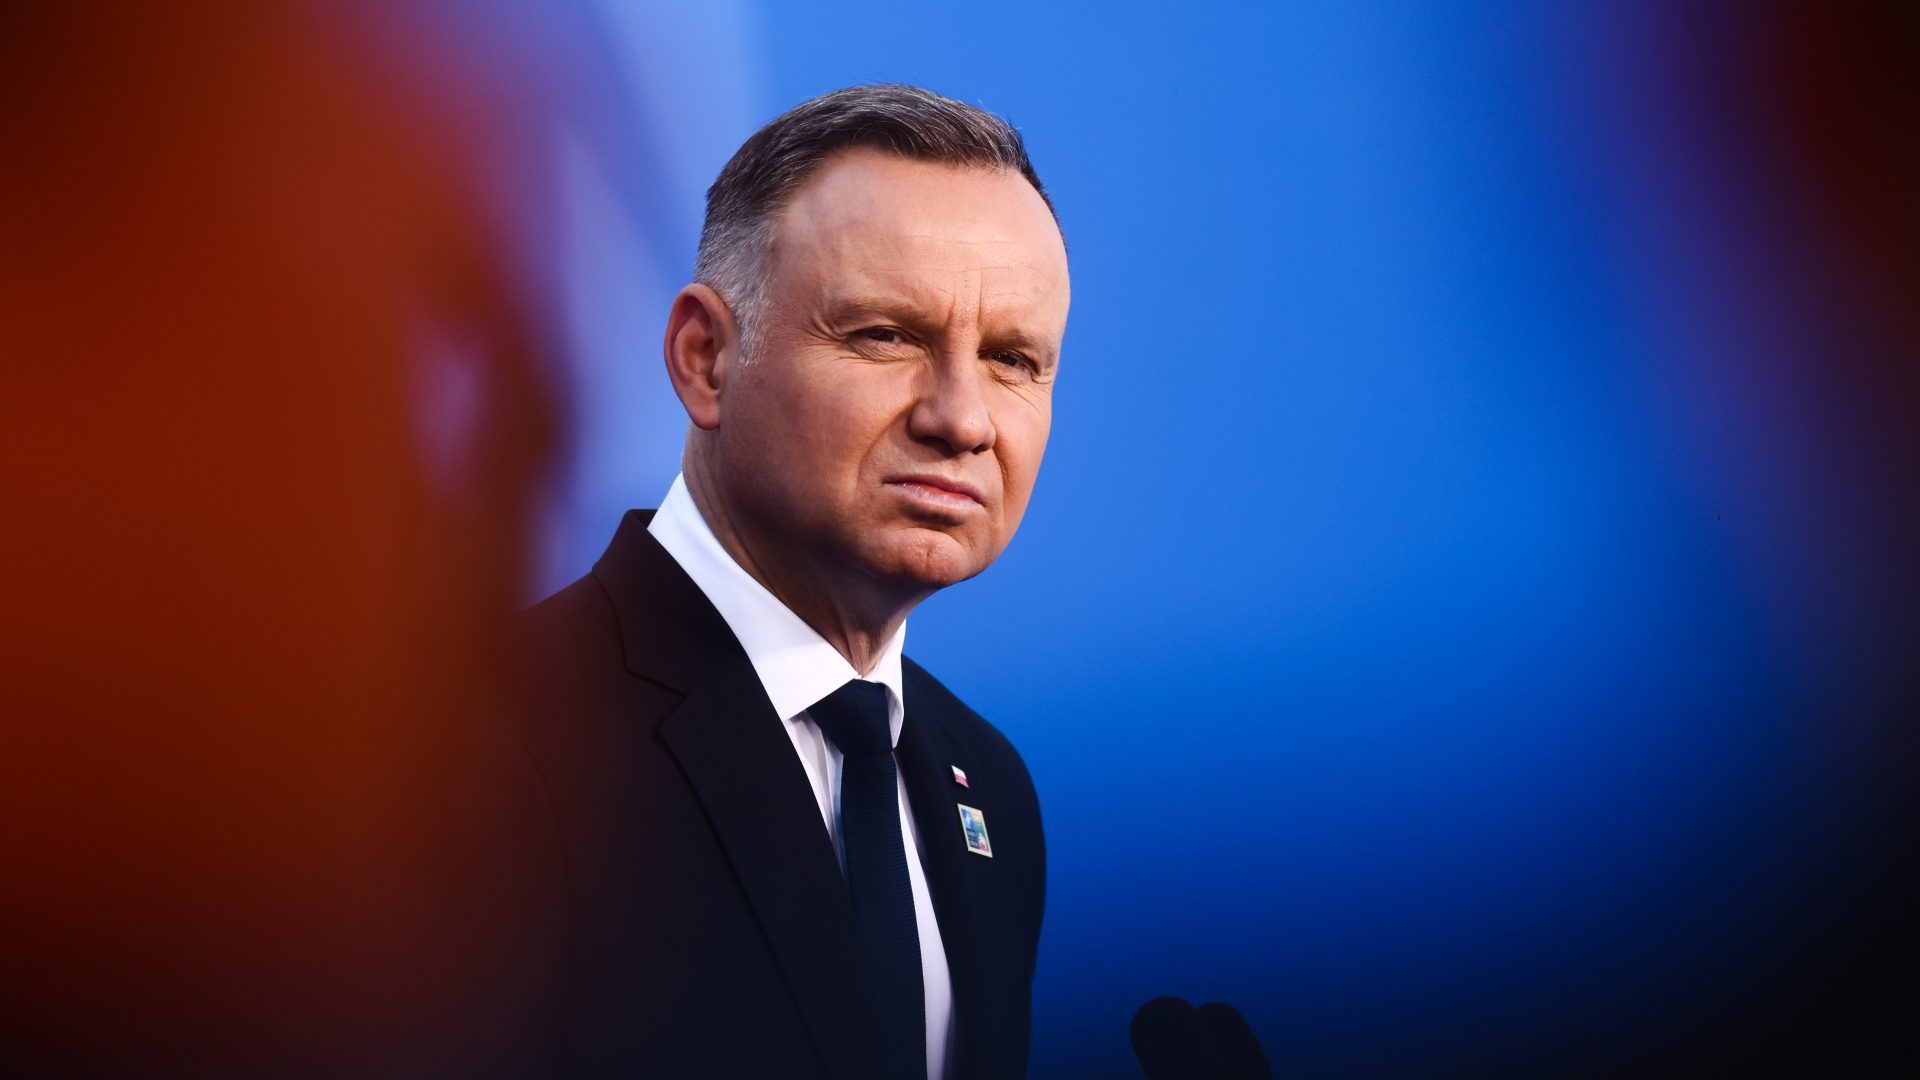 Andrzej Duda, the President of Poland, attends NATO Summit at LITEXPO Lithuanian Exhibition and Congress Center in Vilnius. Photo: Beata Zawrzel/NurPhoto via Getty Images